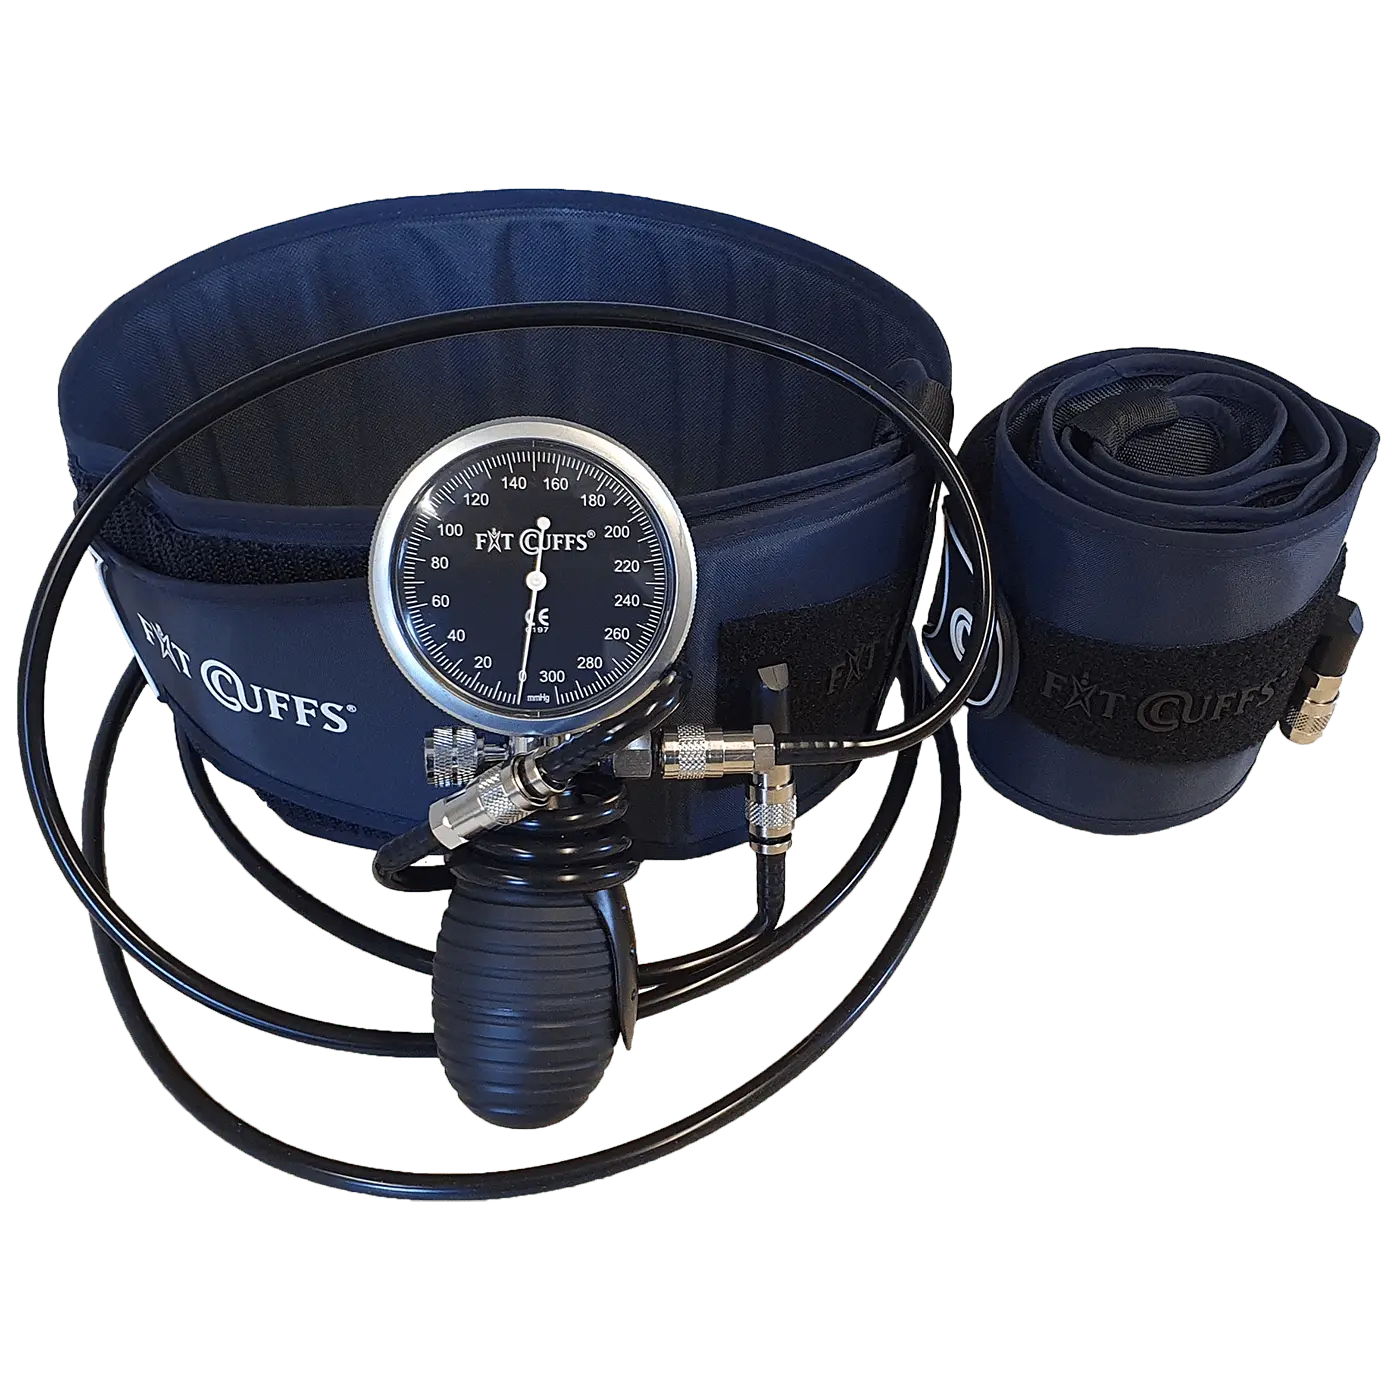 Se Fit Cuffs - Performance Lower V3.1 Hard Case (Limited Edition) - Wireless (Long + Short tube) - Blue hos Fitcuffs.com